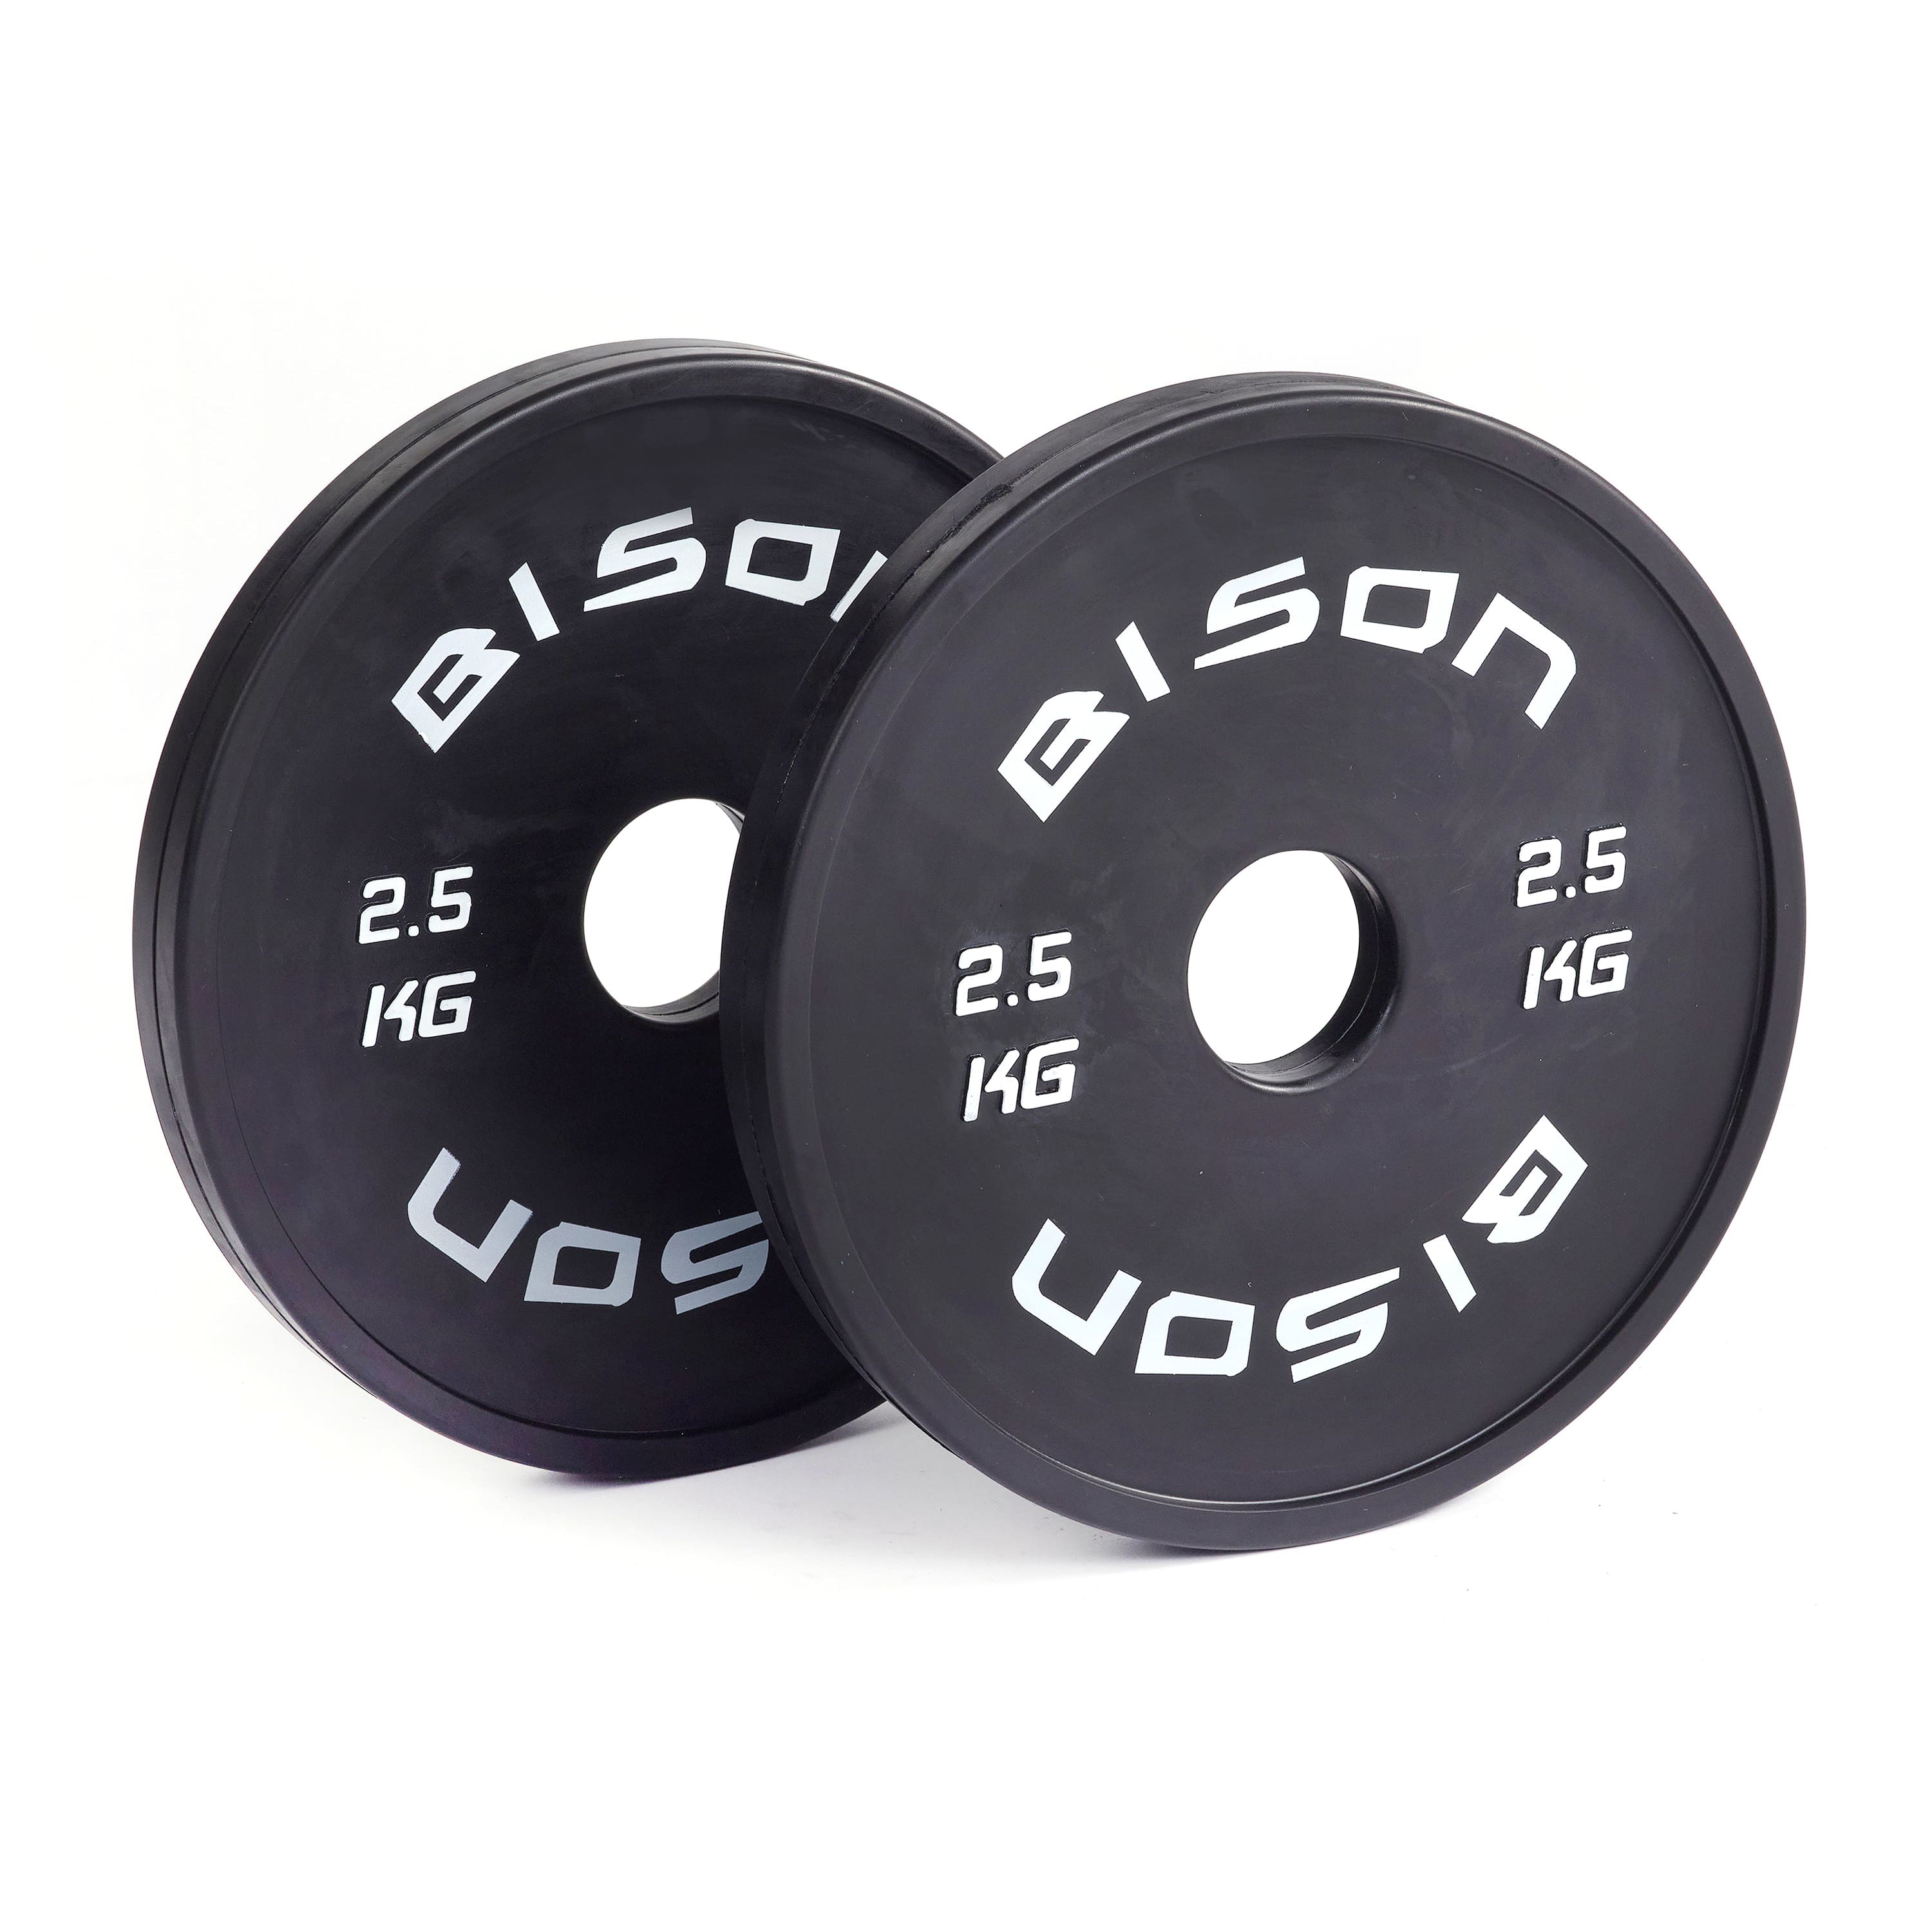 Bison Black Fractional Plates - Wolverson Fitness